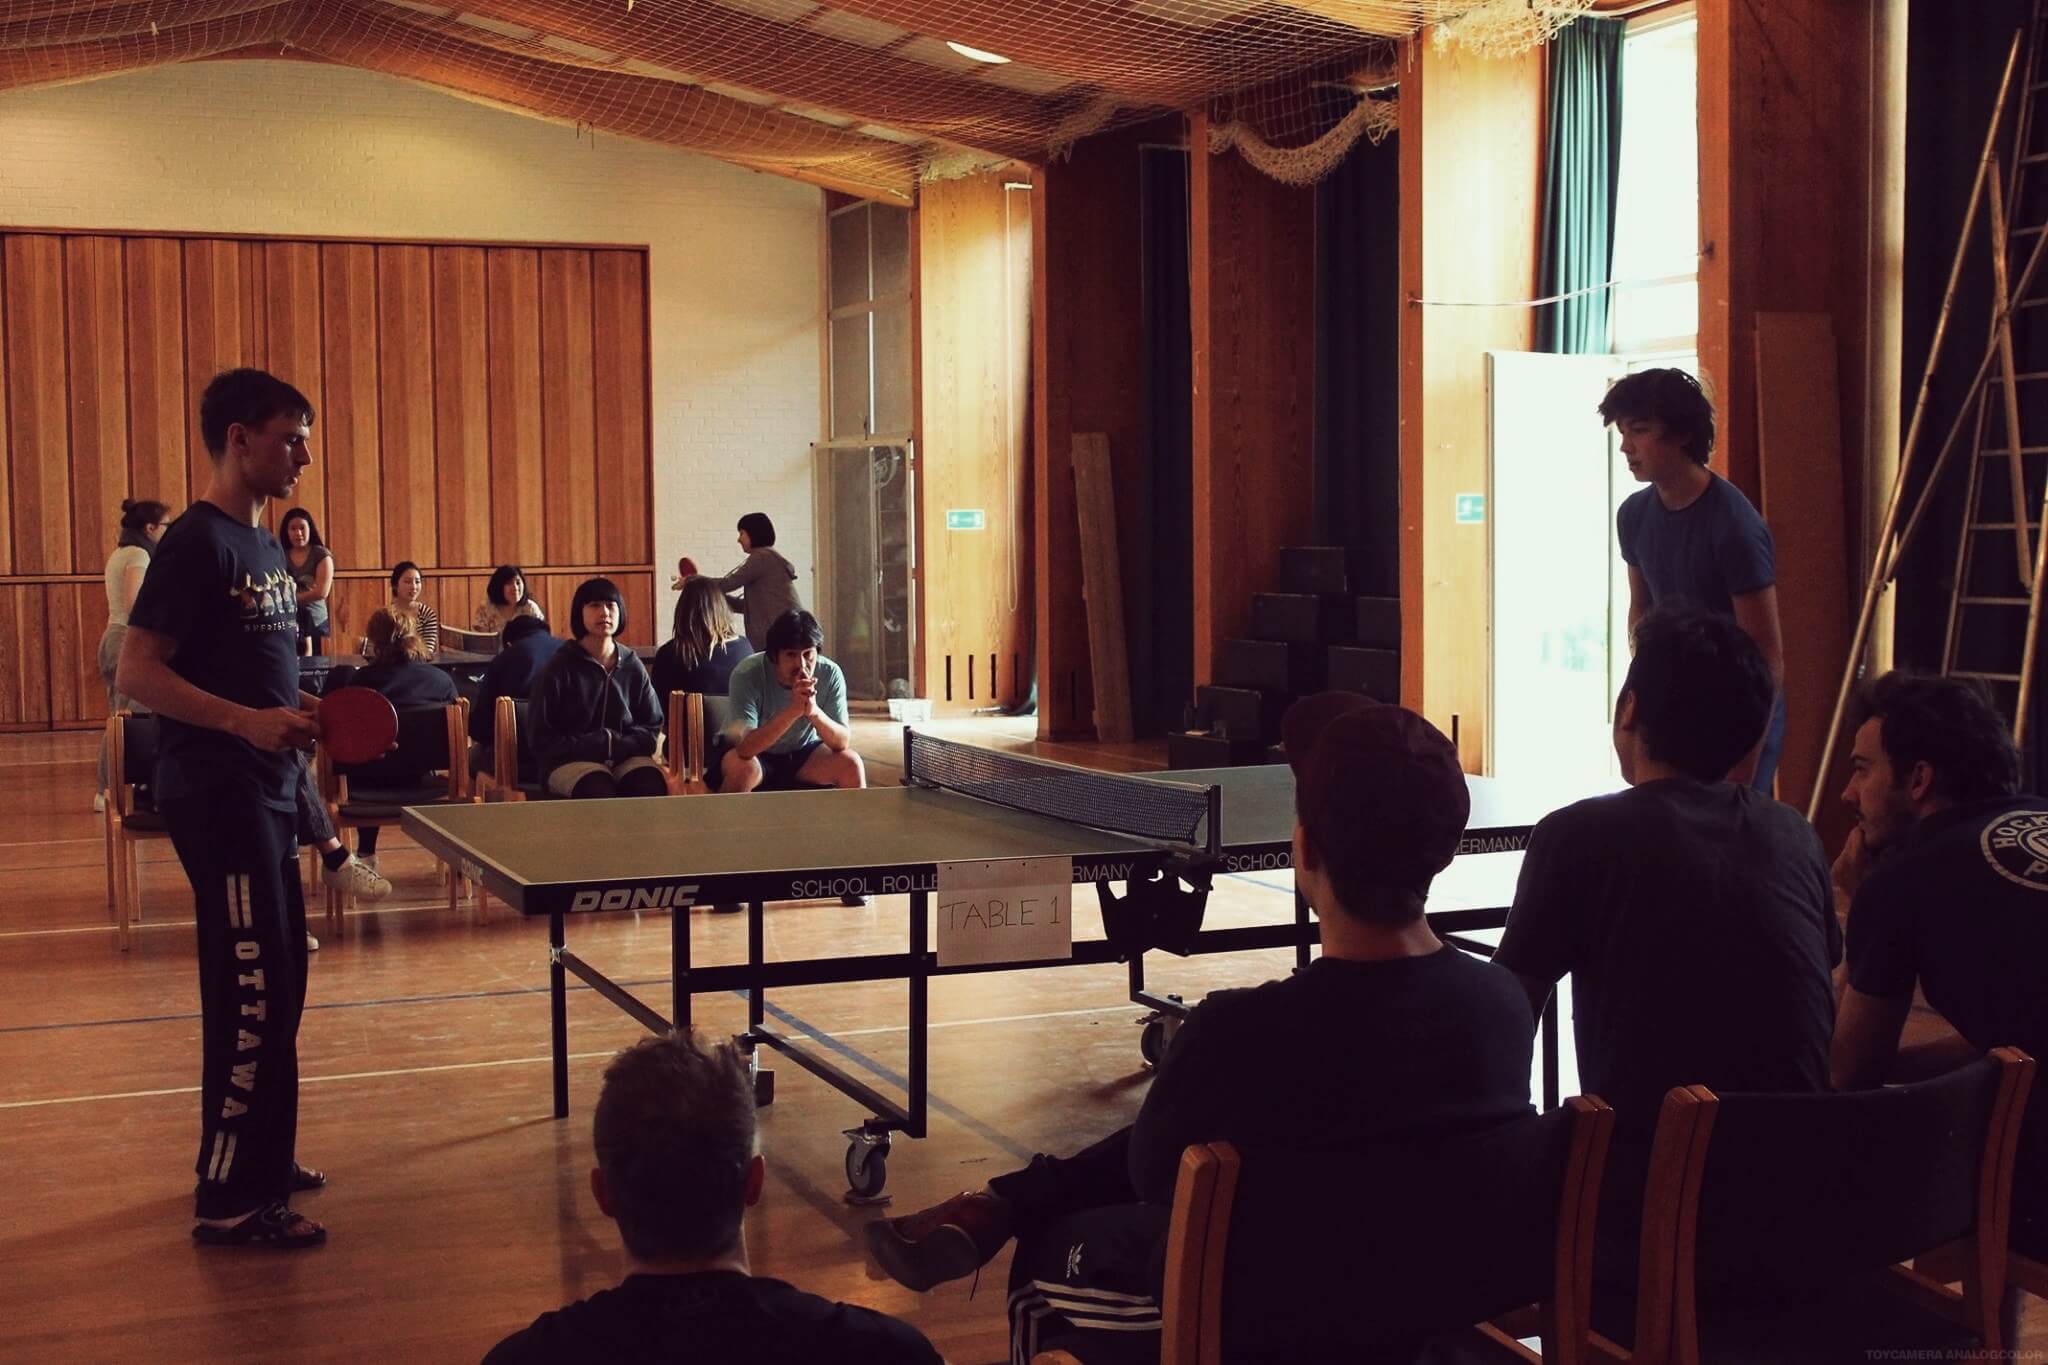 Folk High School Ping pong tournament at International People's College in Denmark